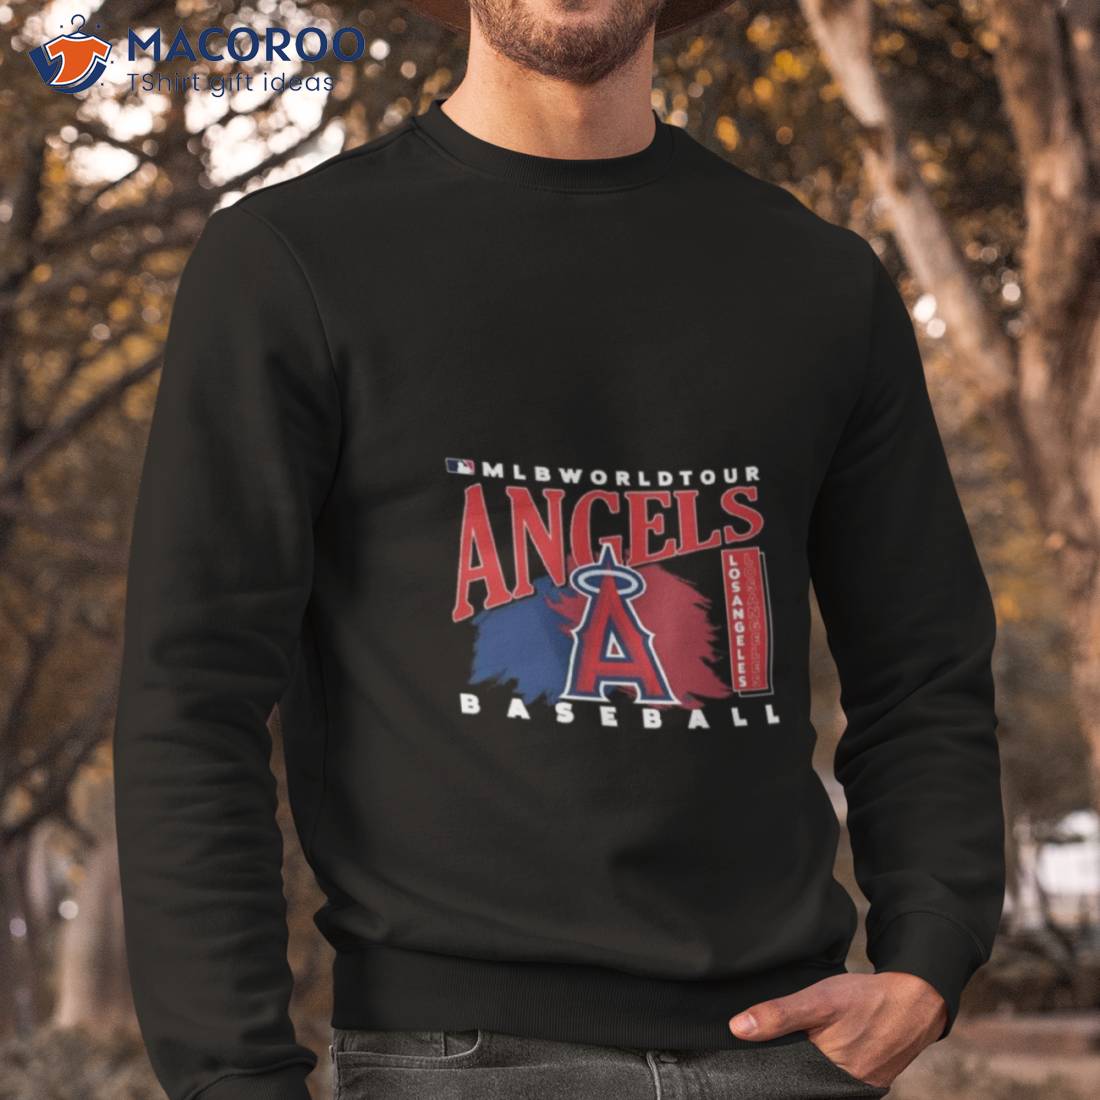 Angels Gift Guide  Los Angeles Angels